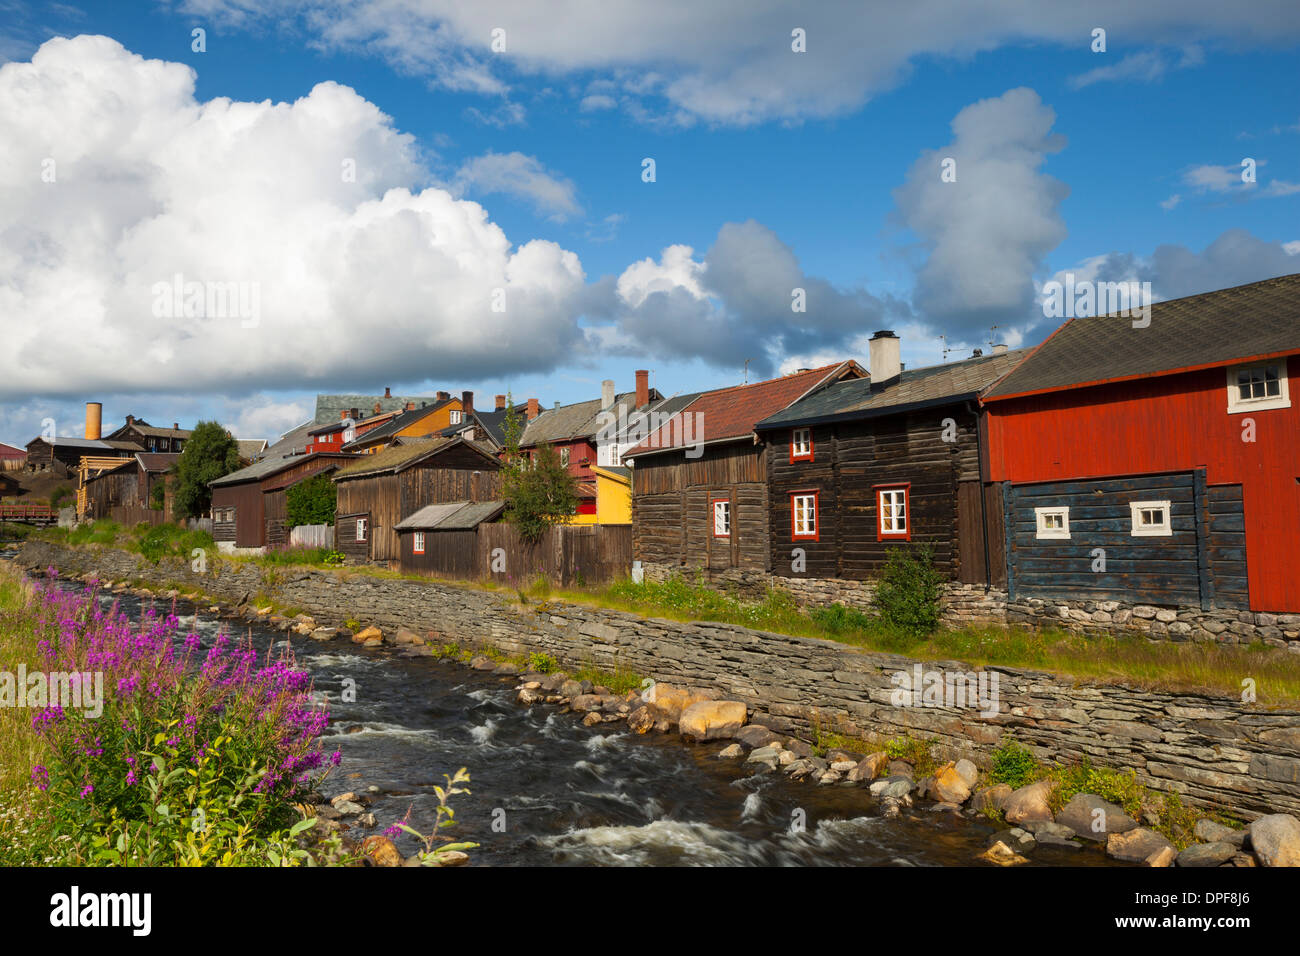 The old mining town of Roros, Sor-Trondelag County, Gauldal District, Norway, Scandinavia, Europe Stock Photo